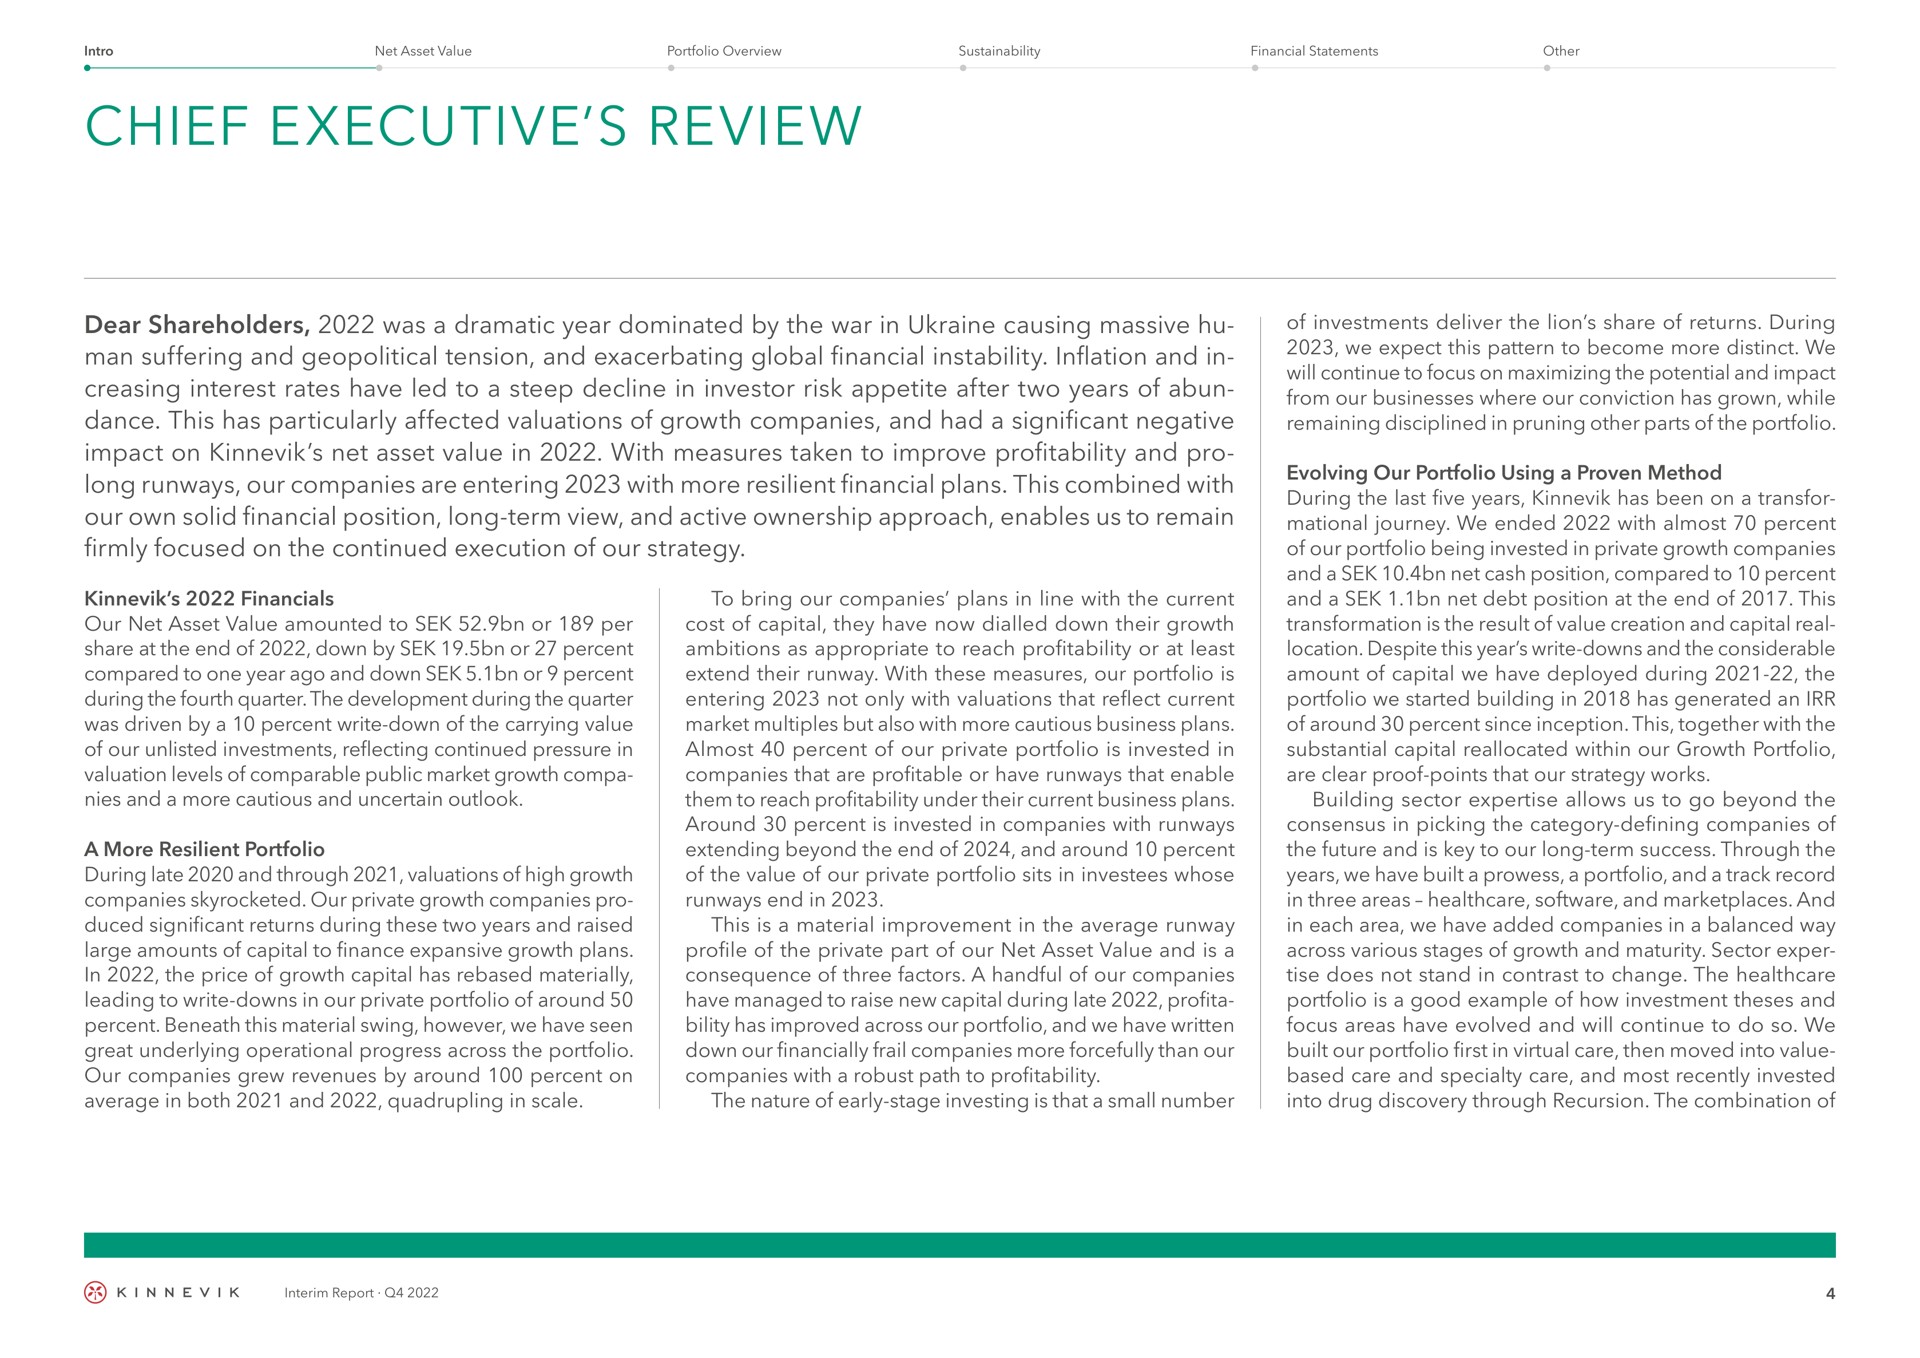 chief executive review dear shareholders was a dramatic year dominated by the war in causing massive man suffering and geopolitical tension and exacerbating global financial instability inflation and in creasing interest rates have led to a steep decline in investor risk appetite after two years of dance this has particularly affected valuations of growth companies and had a significant negative impact on net asset value in with measures taken to improve profitability and pro long runways our companies are entering with more resilient financial plans this combined with our own solid financial position long term view and active ownership approach enables us to remain firmly focused on the continued execution of our strategy our net asset value amounted to or per share at the end of down by or percent compared to one year ago and down or percent during the fourth quarter the development during the quarter was driven by a percent write down of the carrying value of our unlisted investments reflecting continued pressure in valuation levels of comparable public market growth and a more cautious and uncertain outlook a more resilient portfolio during late and through valuations of high growth companies skyrocketed our private growth companies pro significant returns during these two years and raised large amounts of capital to finance expansive growth plans in the price of growth capital has materially leading to write downs in our private portfolio of around percent beneath this material swing however we have seen great underlying operational progress across the portfolio our companies grew revenues by around percent on average in both and quadrupling in scale to bring our companies plans in line with the current cost of capital they have now dialled down their growth ambitions as appropriate to reach profitability or at least extend their runway with these measures our portfolio is entering not only with valuations that reflect current market multiples but also with more cautious business plans almost percent of our private portfolio is invested in companies that are profitable or have runways that enable them to reach profitability under their current business plans around percent is invested in companies with runways extending beyond the end of and around percent of the value of our private portfolio sits in whose runways end in this is a material improvement in the average runway profile of the private part of our net asset value and is a consequence of three factors a handful of our companies have managed to raise new capital during late has improved across our portfolio and we have written down our financially frail companies more forcefully than our companies with a robust path to profitability the nature of early stage investing is that a small number of investments deliver the lion share of returns during we expect this pattern to become more distinct we will continue to focus on maximizing the potential and impact from our businesses where our conviction has grown while remaining disciplined in pruning other parts of the portfolio evolving our portfolio using a proven method during the last five years has been on a journey we ended with almost percent of our portfolio being invested in private growth companies and a net cash position compared to percent and a net debt position at the end of this transformation is the result of value creation and capital real location despite this year write downs and the considerable amount of capital we have deployed during the portfolio we started building in has generated an of around percent since inception this together with the substantial capital reallocated within our growth portfolio are clear proof points that our strategy works building sector allows us to go beyond the consensus in picking the category defining companies of the future and is key to our long term success through the years we have built a prowess a portfolio and a track record in three areas and and in each area we have added companies in a balanced way across various stages of growth and maturity sector does not stand in contrast to change the portfolio is a good example of how investment theses and focus areas have evolved and will continue to do so we built our portfolio first in virtual care then moved into value based care and specialty care and most recently invested into drug discovery through recursion the combination of | Kinnevik